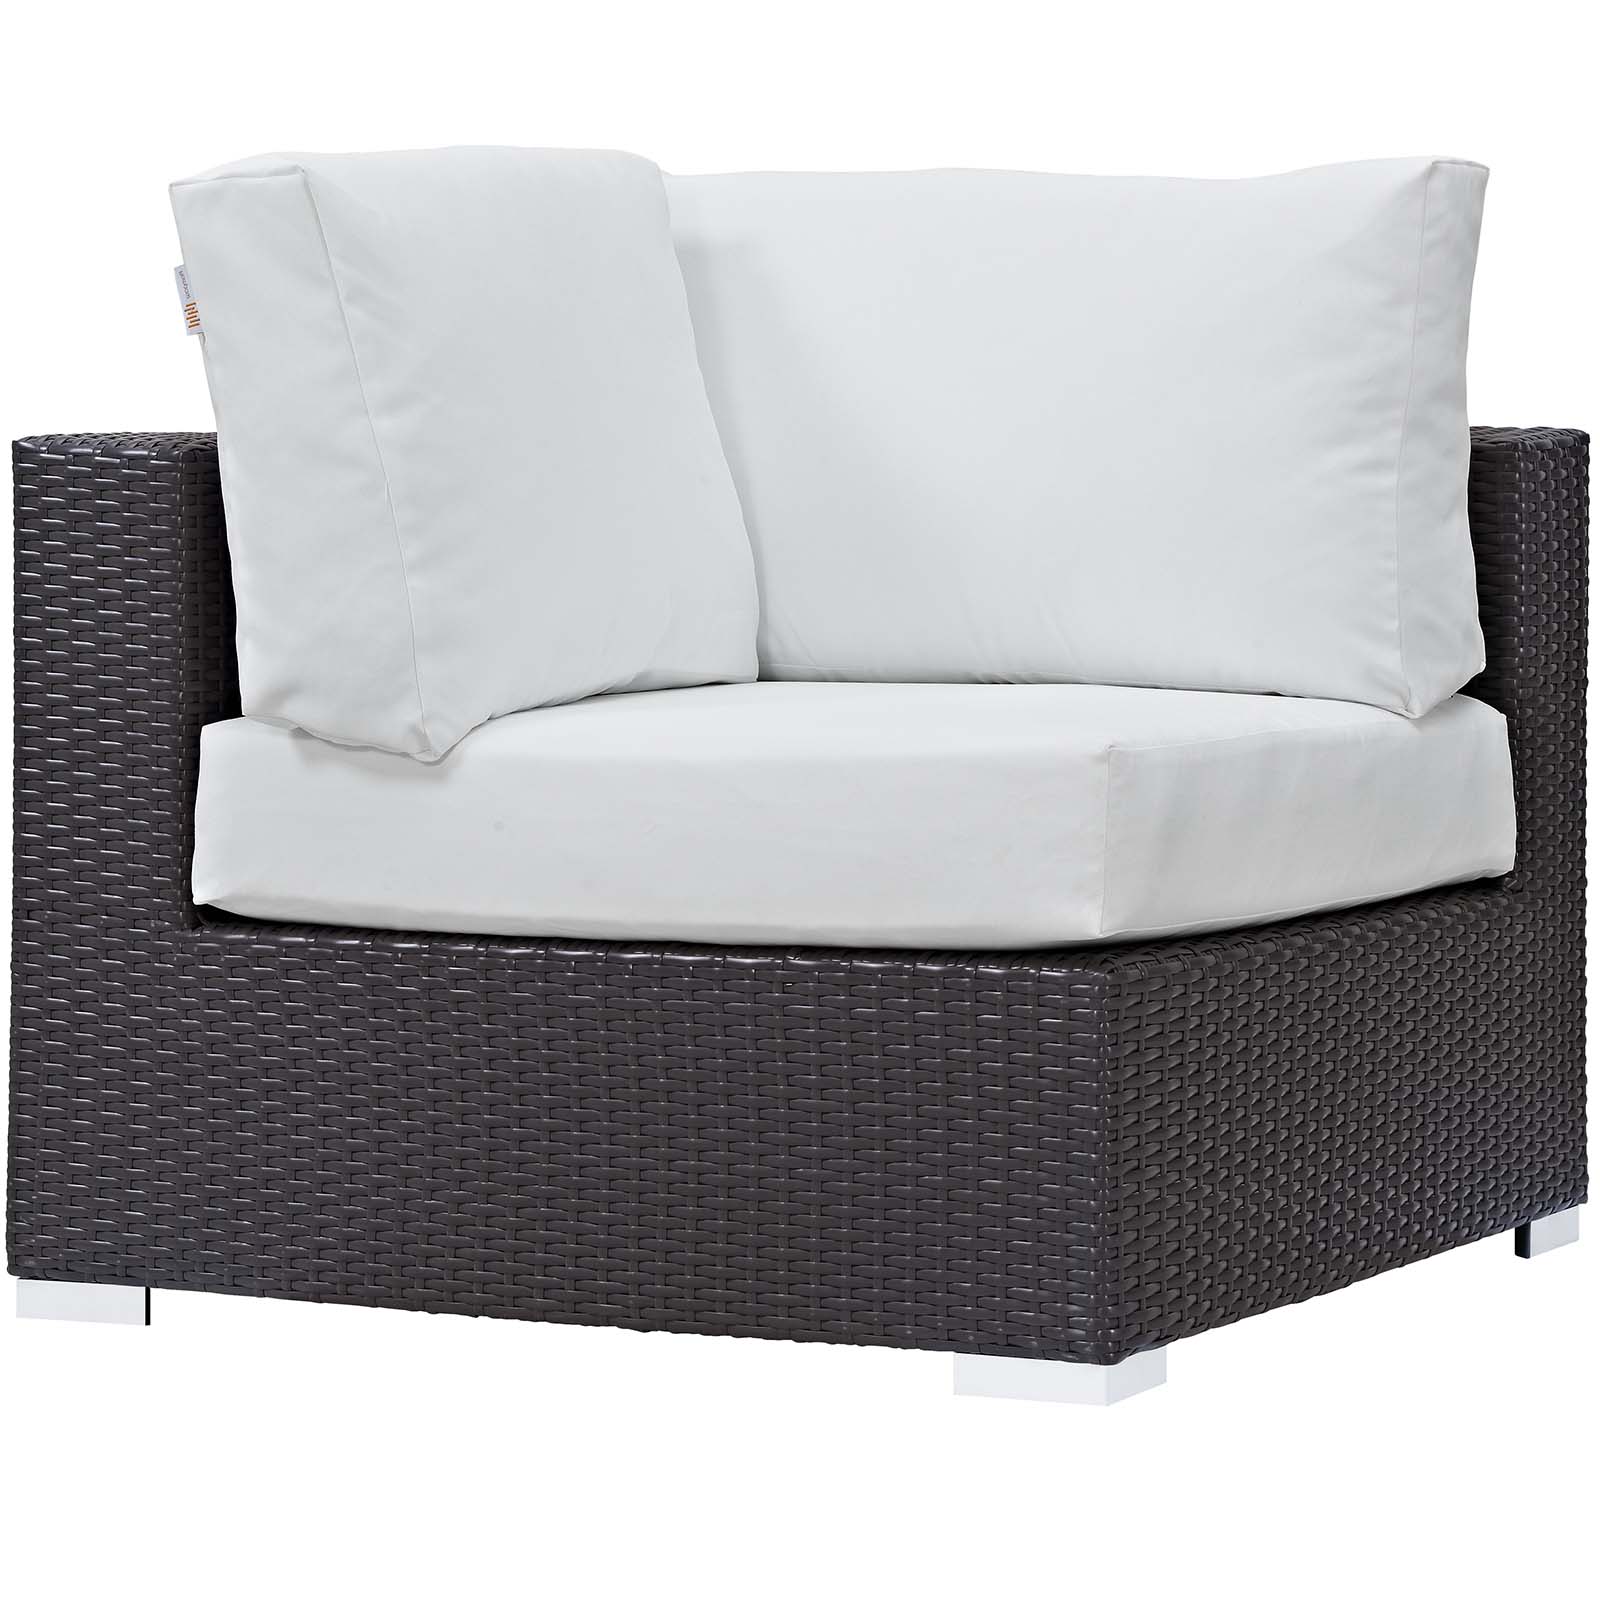 Contemporary Modern Urban Designer Outdoor Patio Balcony Garden Furniture Lounge Sofa, Chair and Coffee Table Fire Pit Set, Fabric Rattan Wicker, White - image 3 of 8